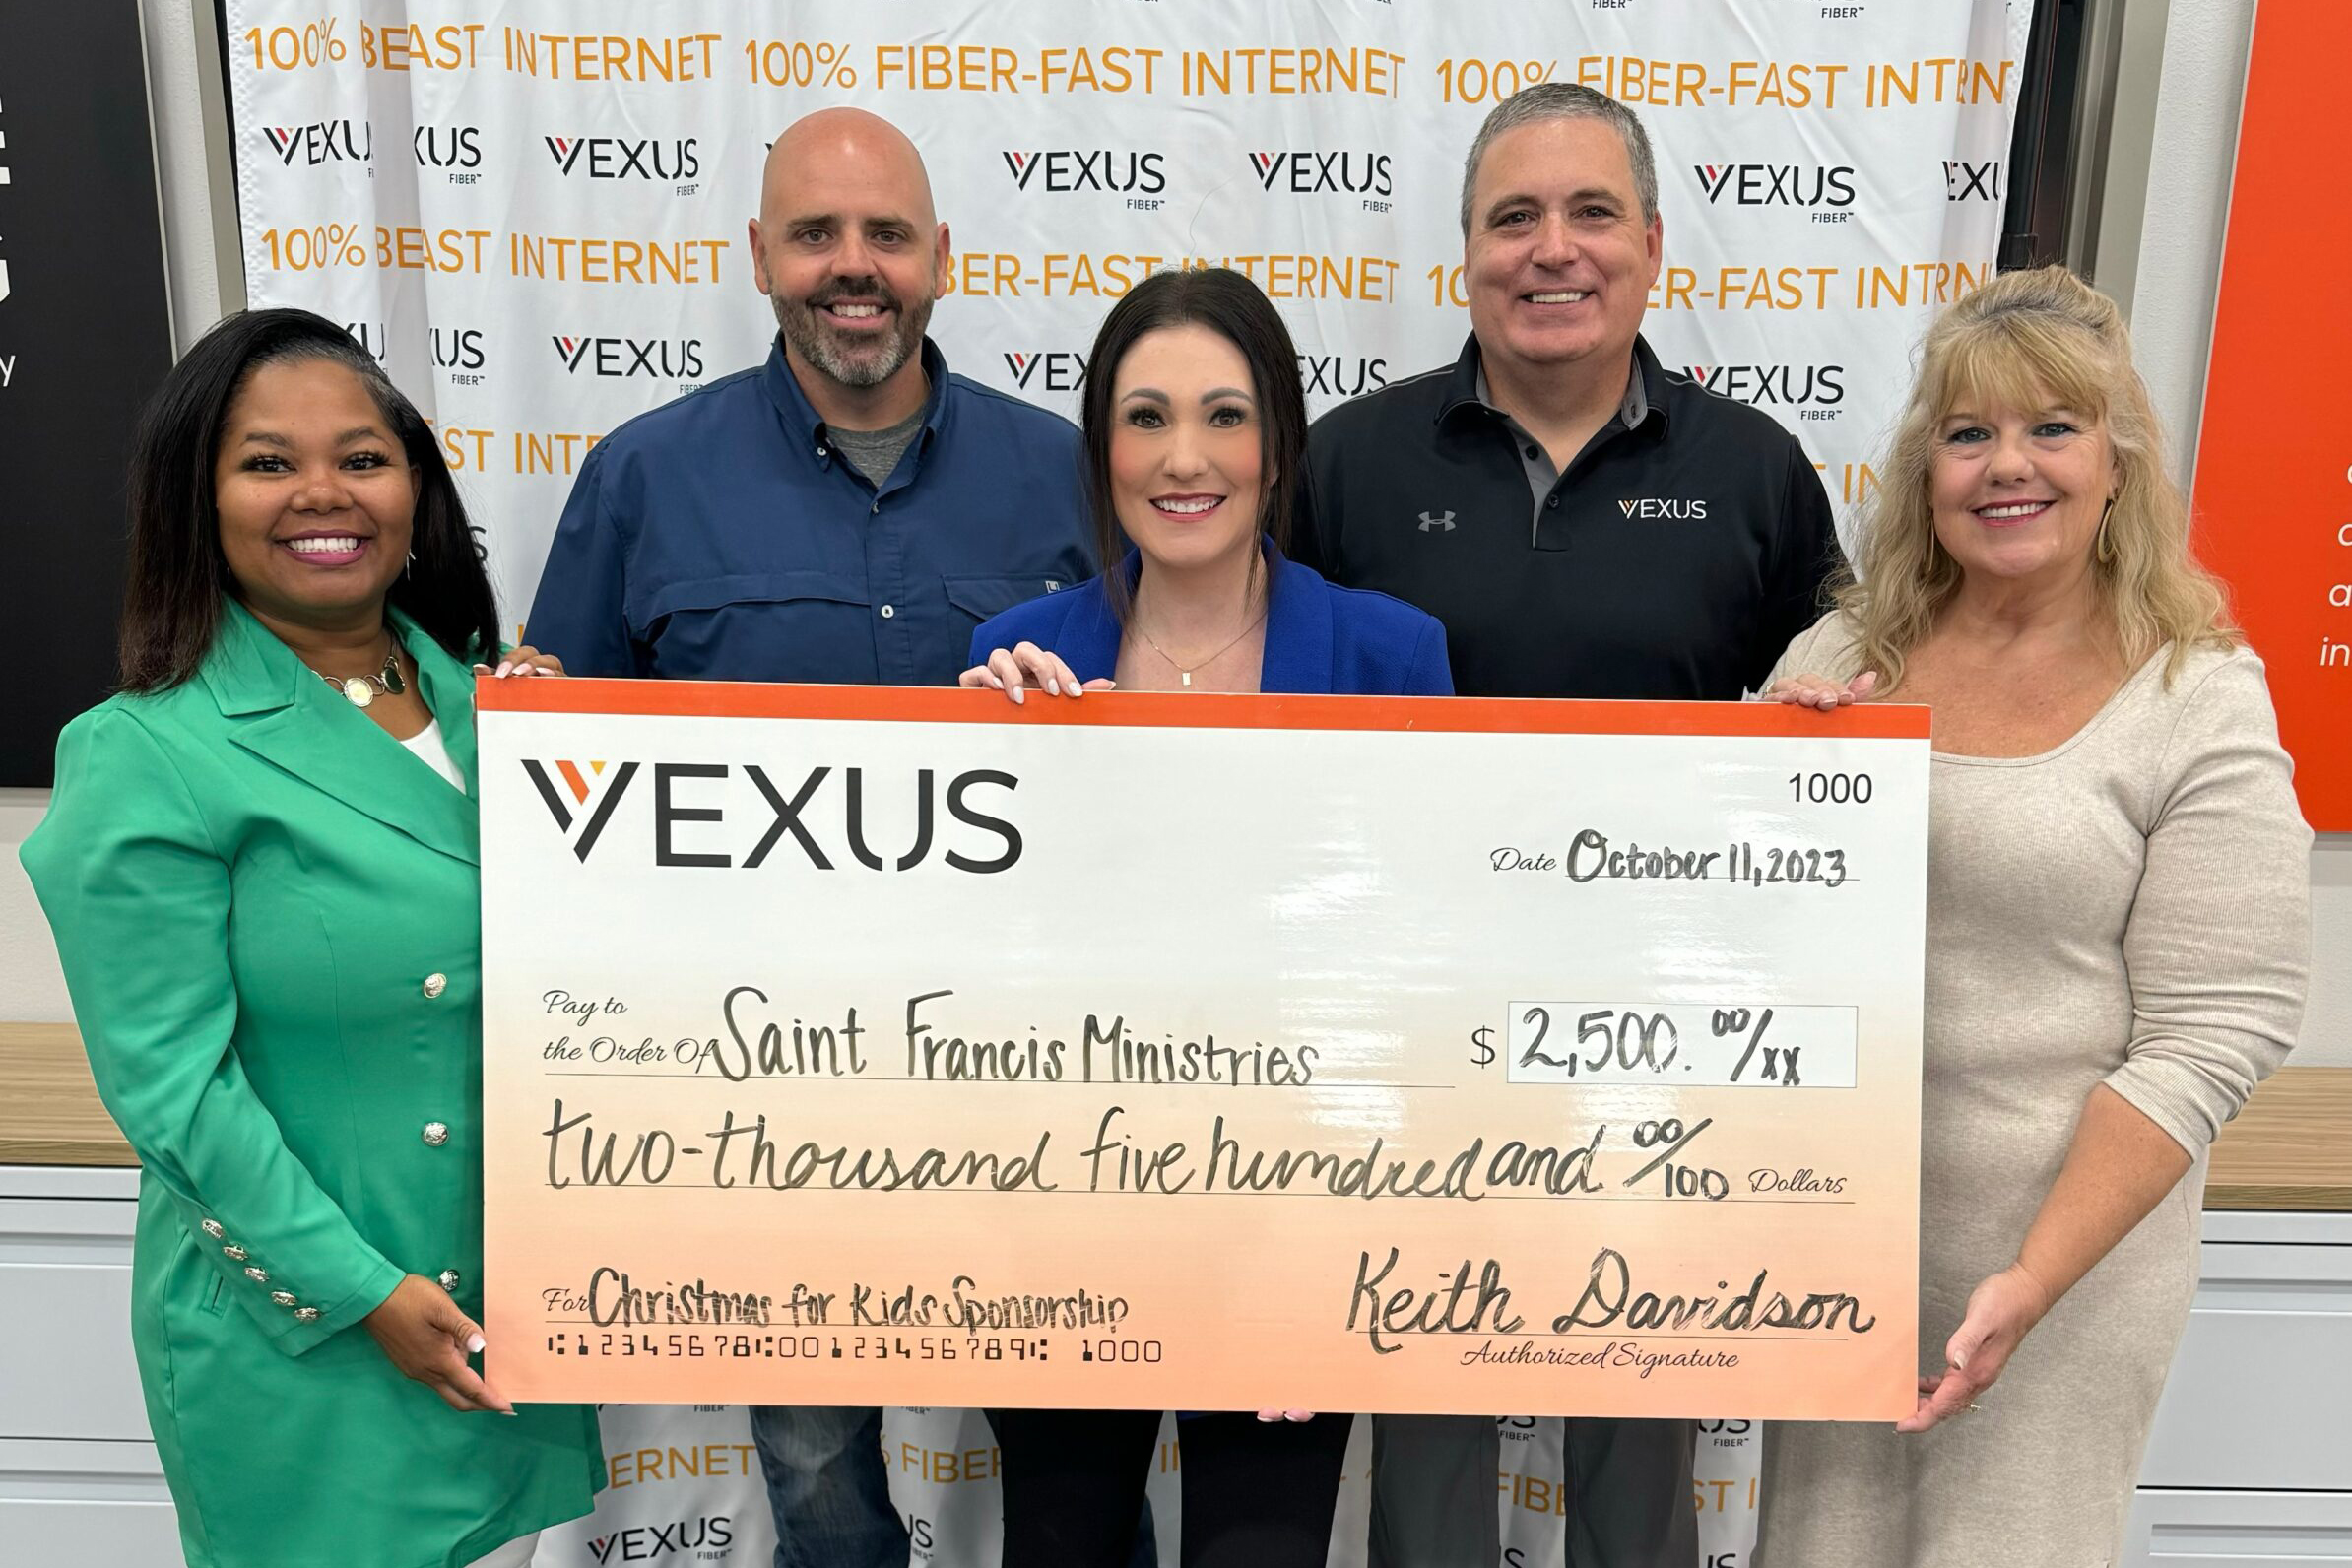 Vexus Fiber spearheads the Texas Christmas for Kids campaign as the kickoff sponsor, providing gifts to children in Lubbock and Amarillo. This initiative exemplifies community partnership and the spirit of giving, ensuring a joyful holiday for children in the child welfare system.